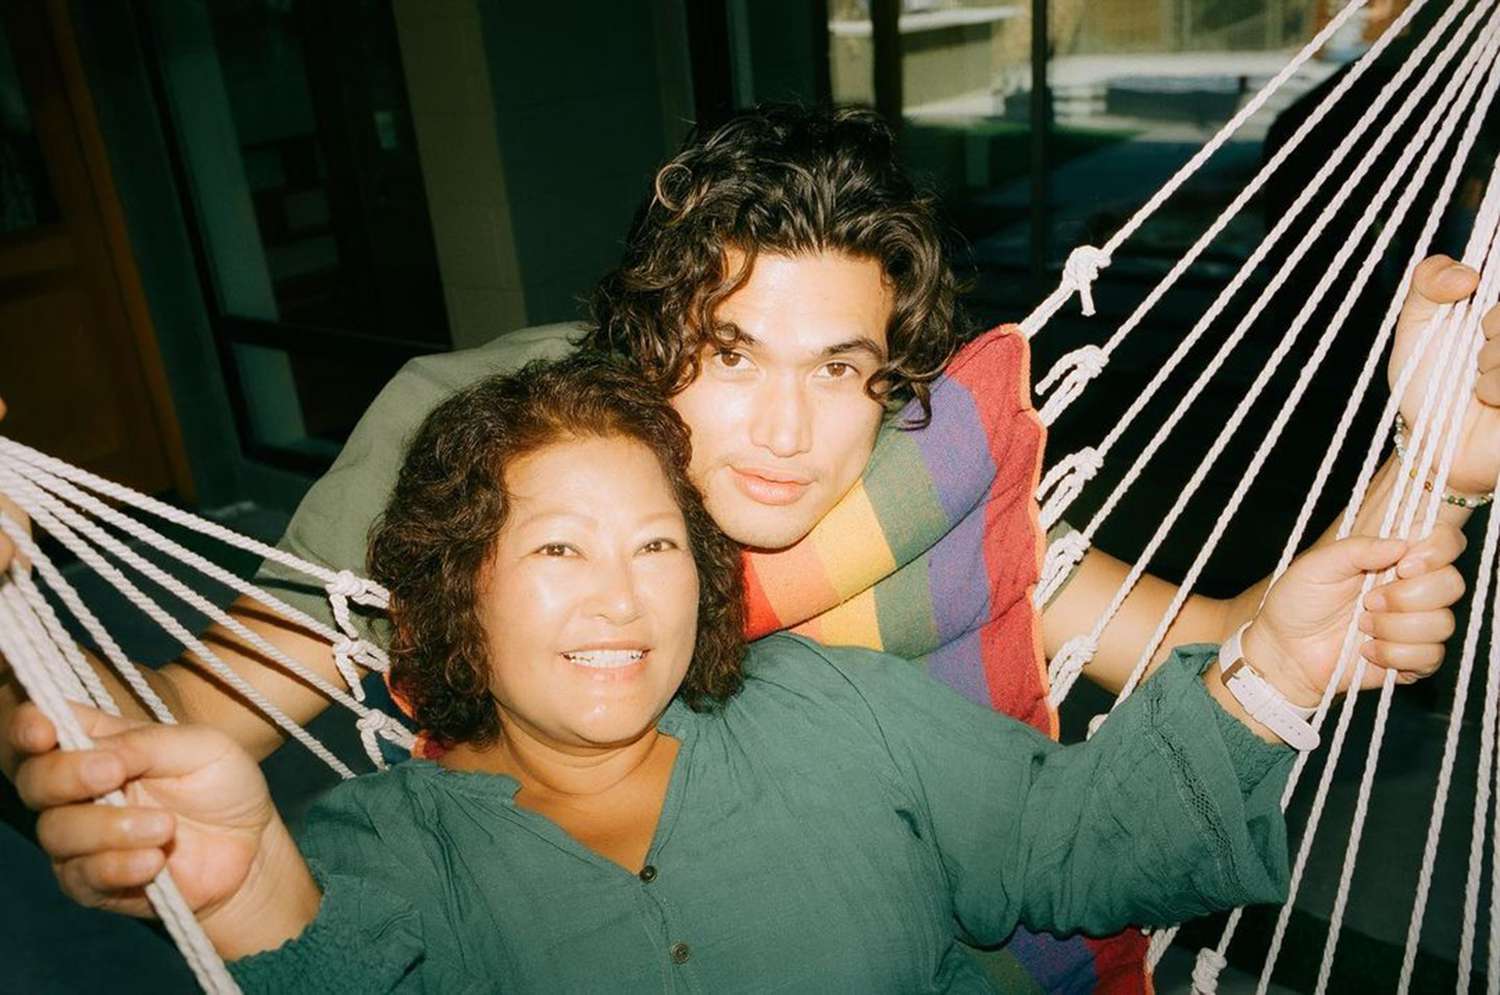 All About Charles Melton's Parents, Sukyong and Phil Melton